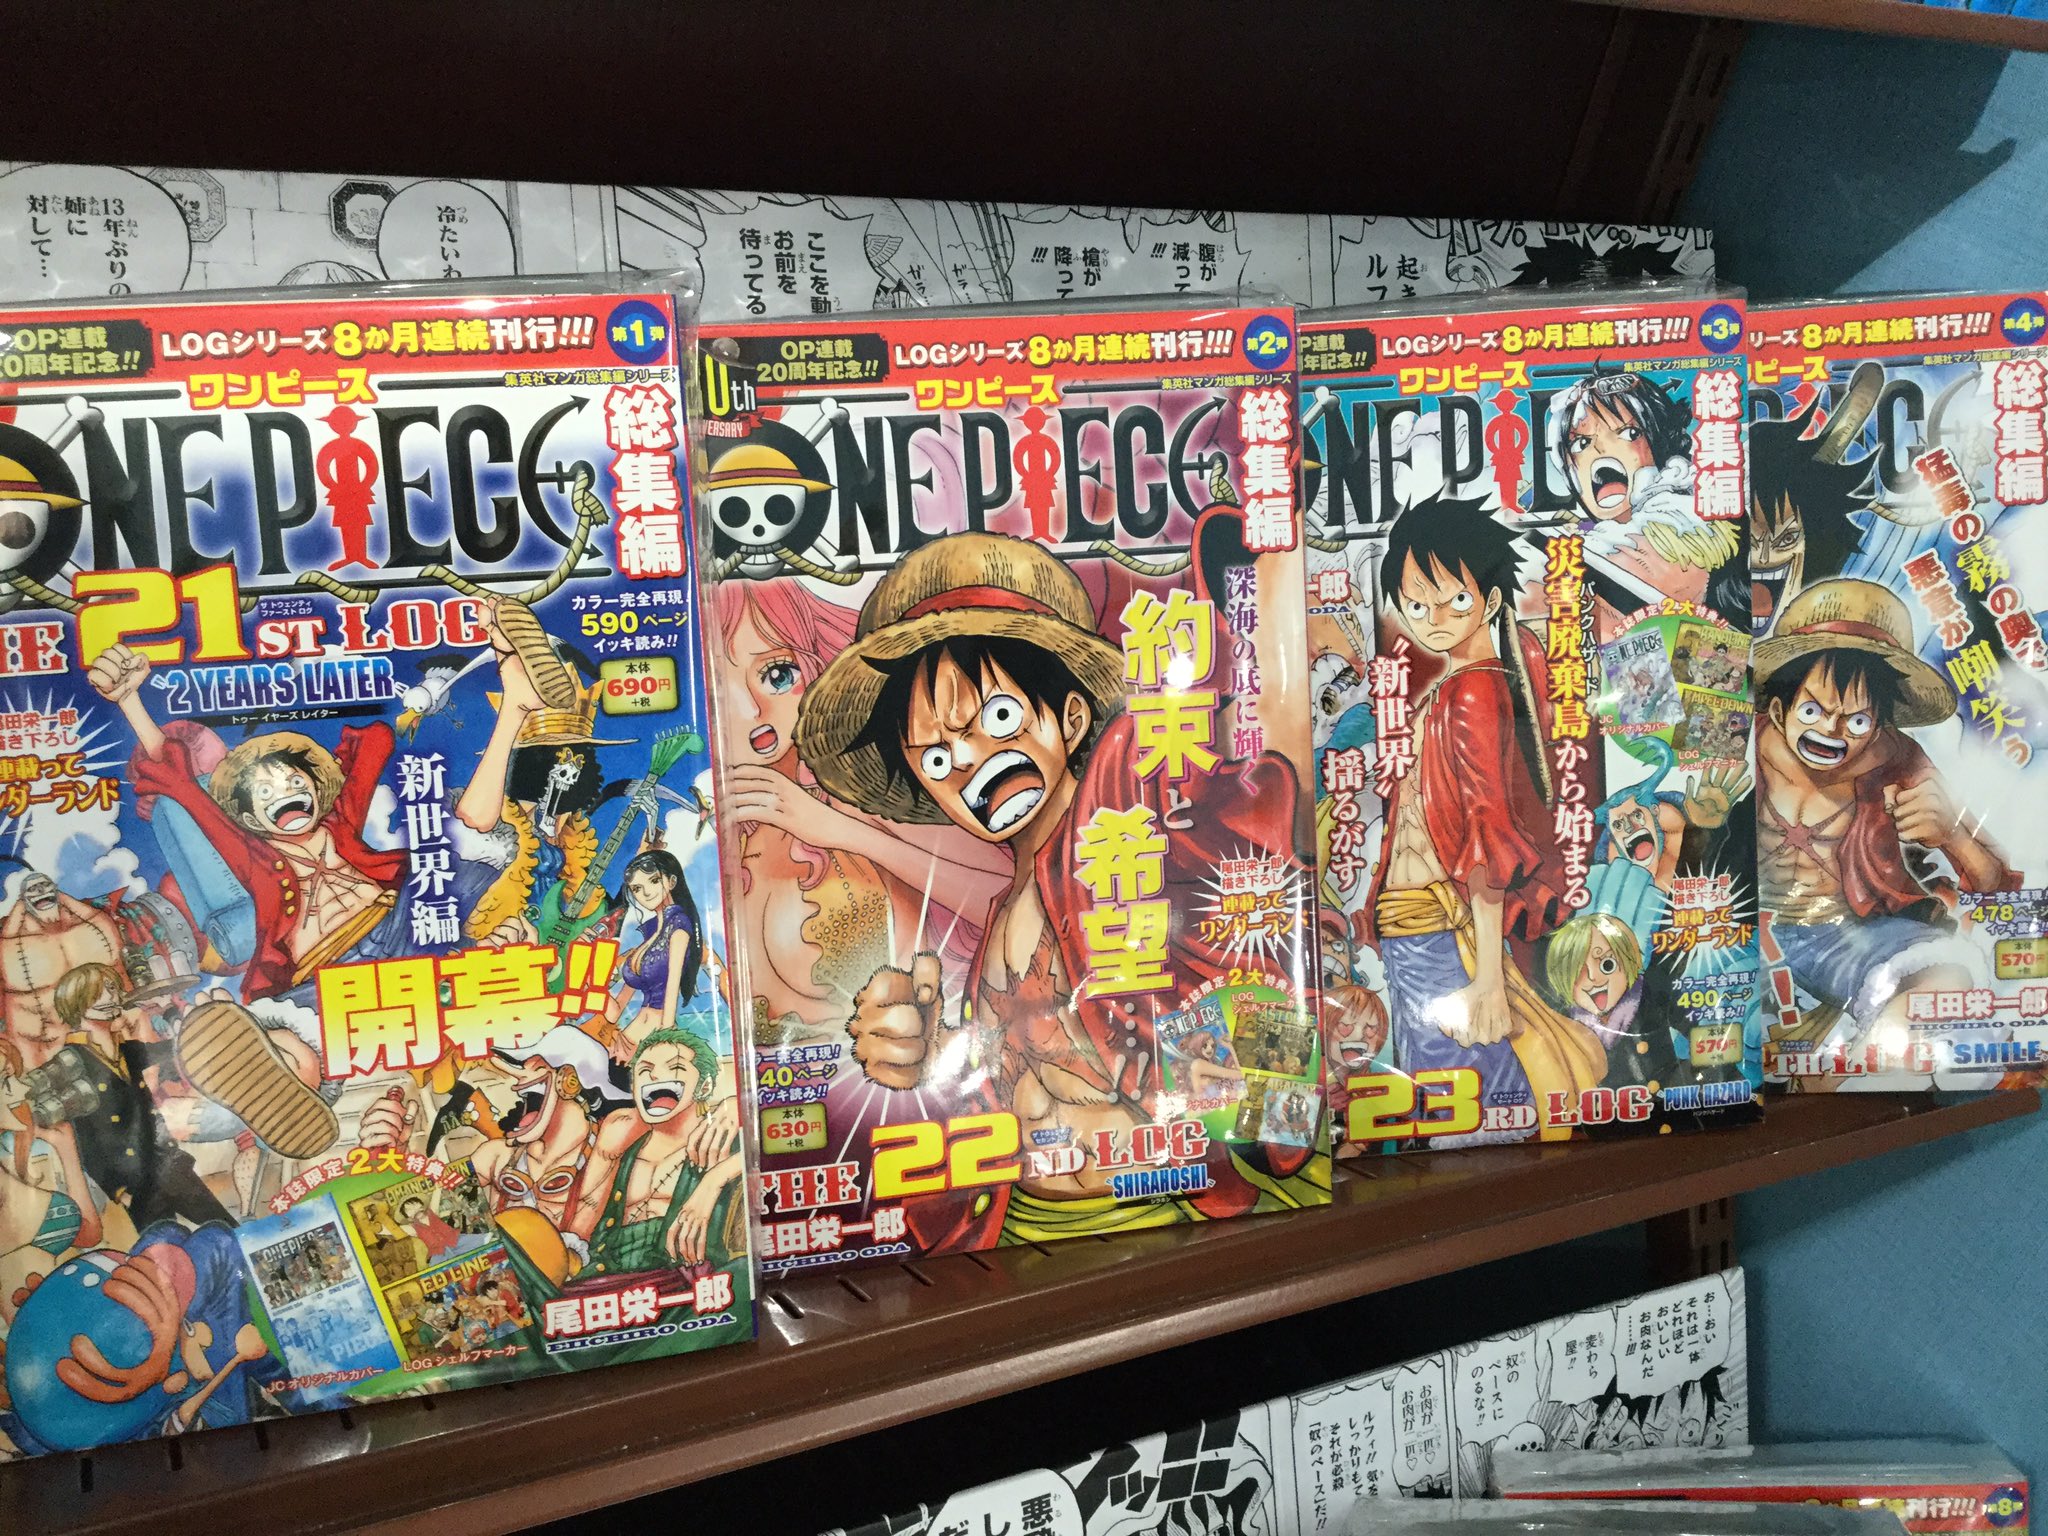 One Piece麦わらストア渋谷本店 再入荷 One Piece 総集編 The 21th Log 2yearslater 690円 税 One Piece 総集編 The 22th Log Shirahoshi 630円 税 One Piece 総集編 The 23th Log Punk Hazard 570円 税 One Piece 総集編 The 24th